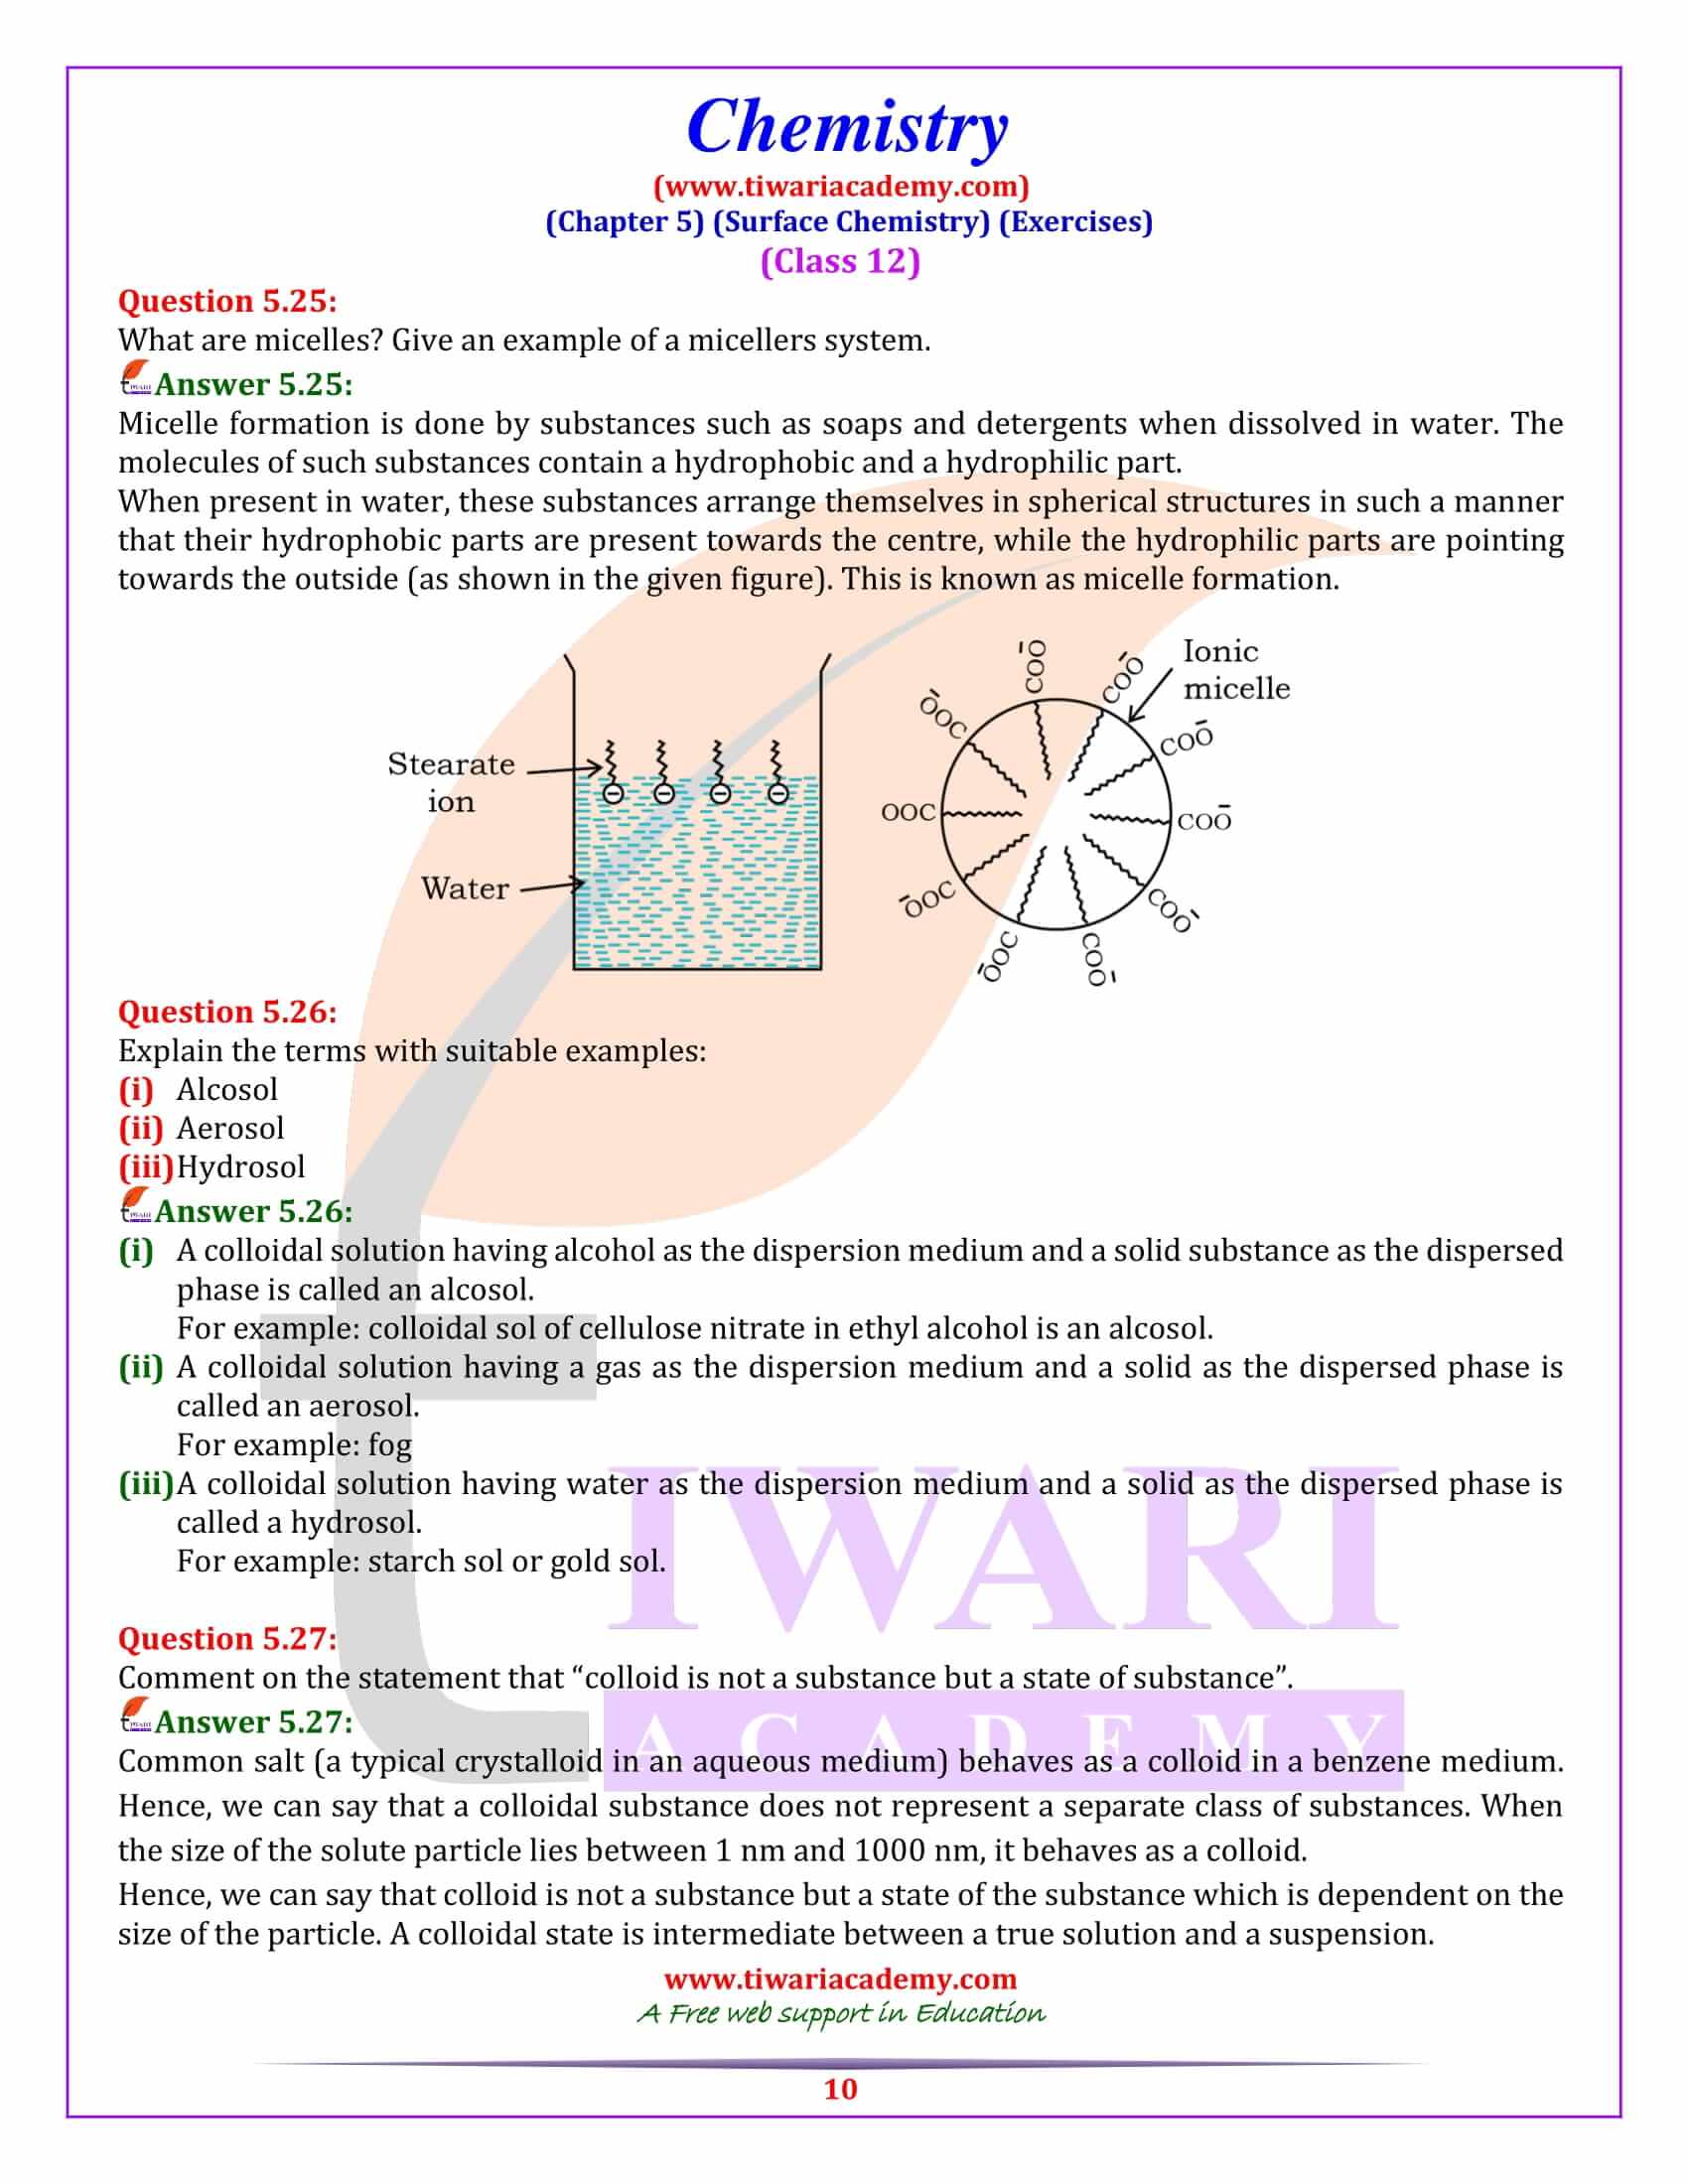 NCERT Solutions for Class 12 Chemistry Chapter 5 exercises